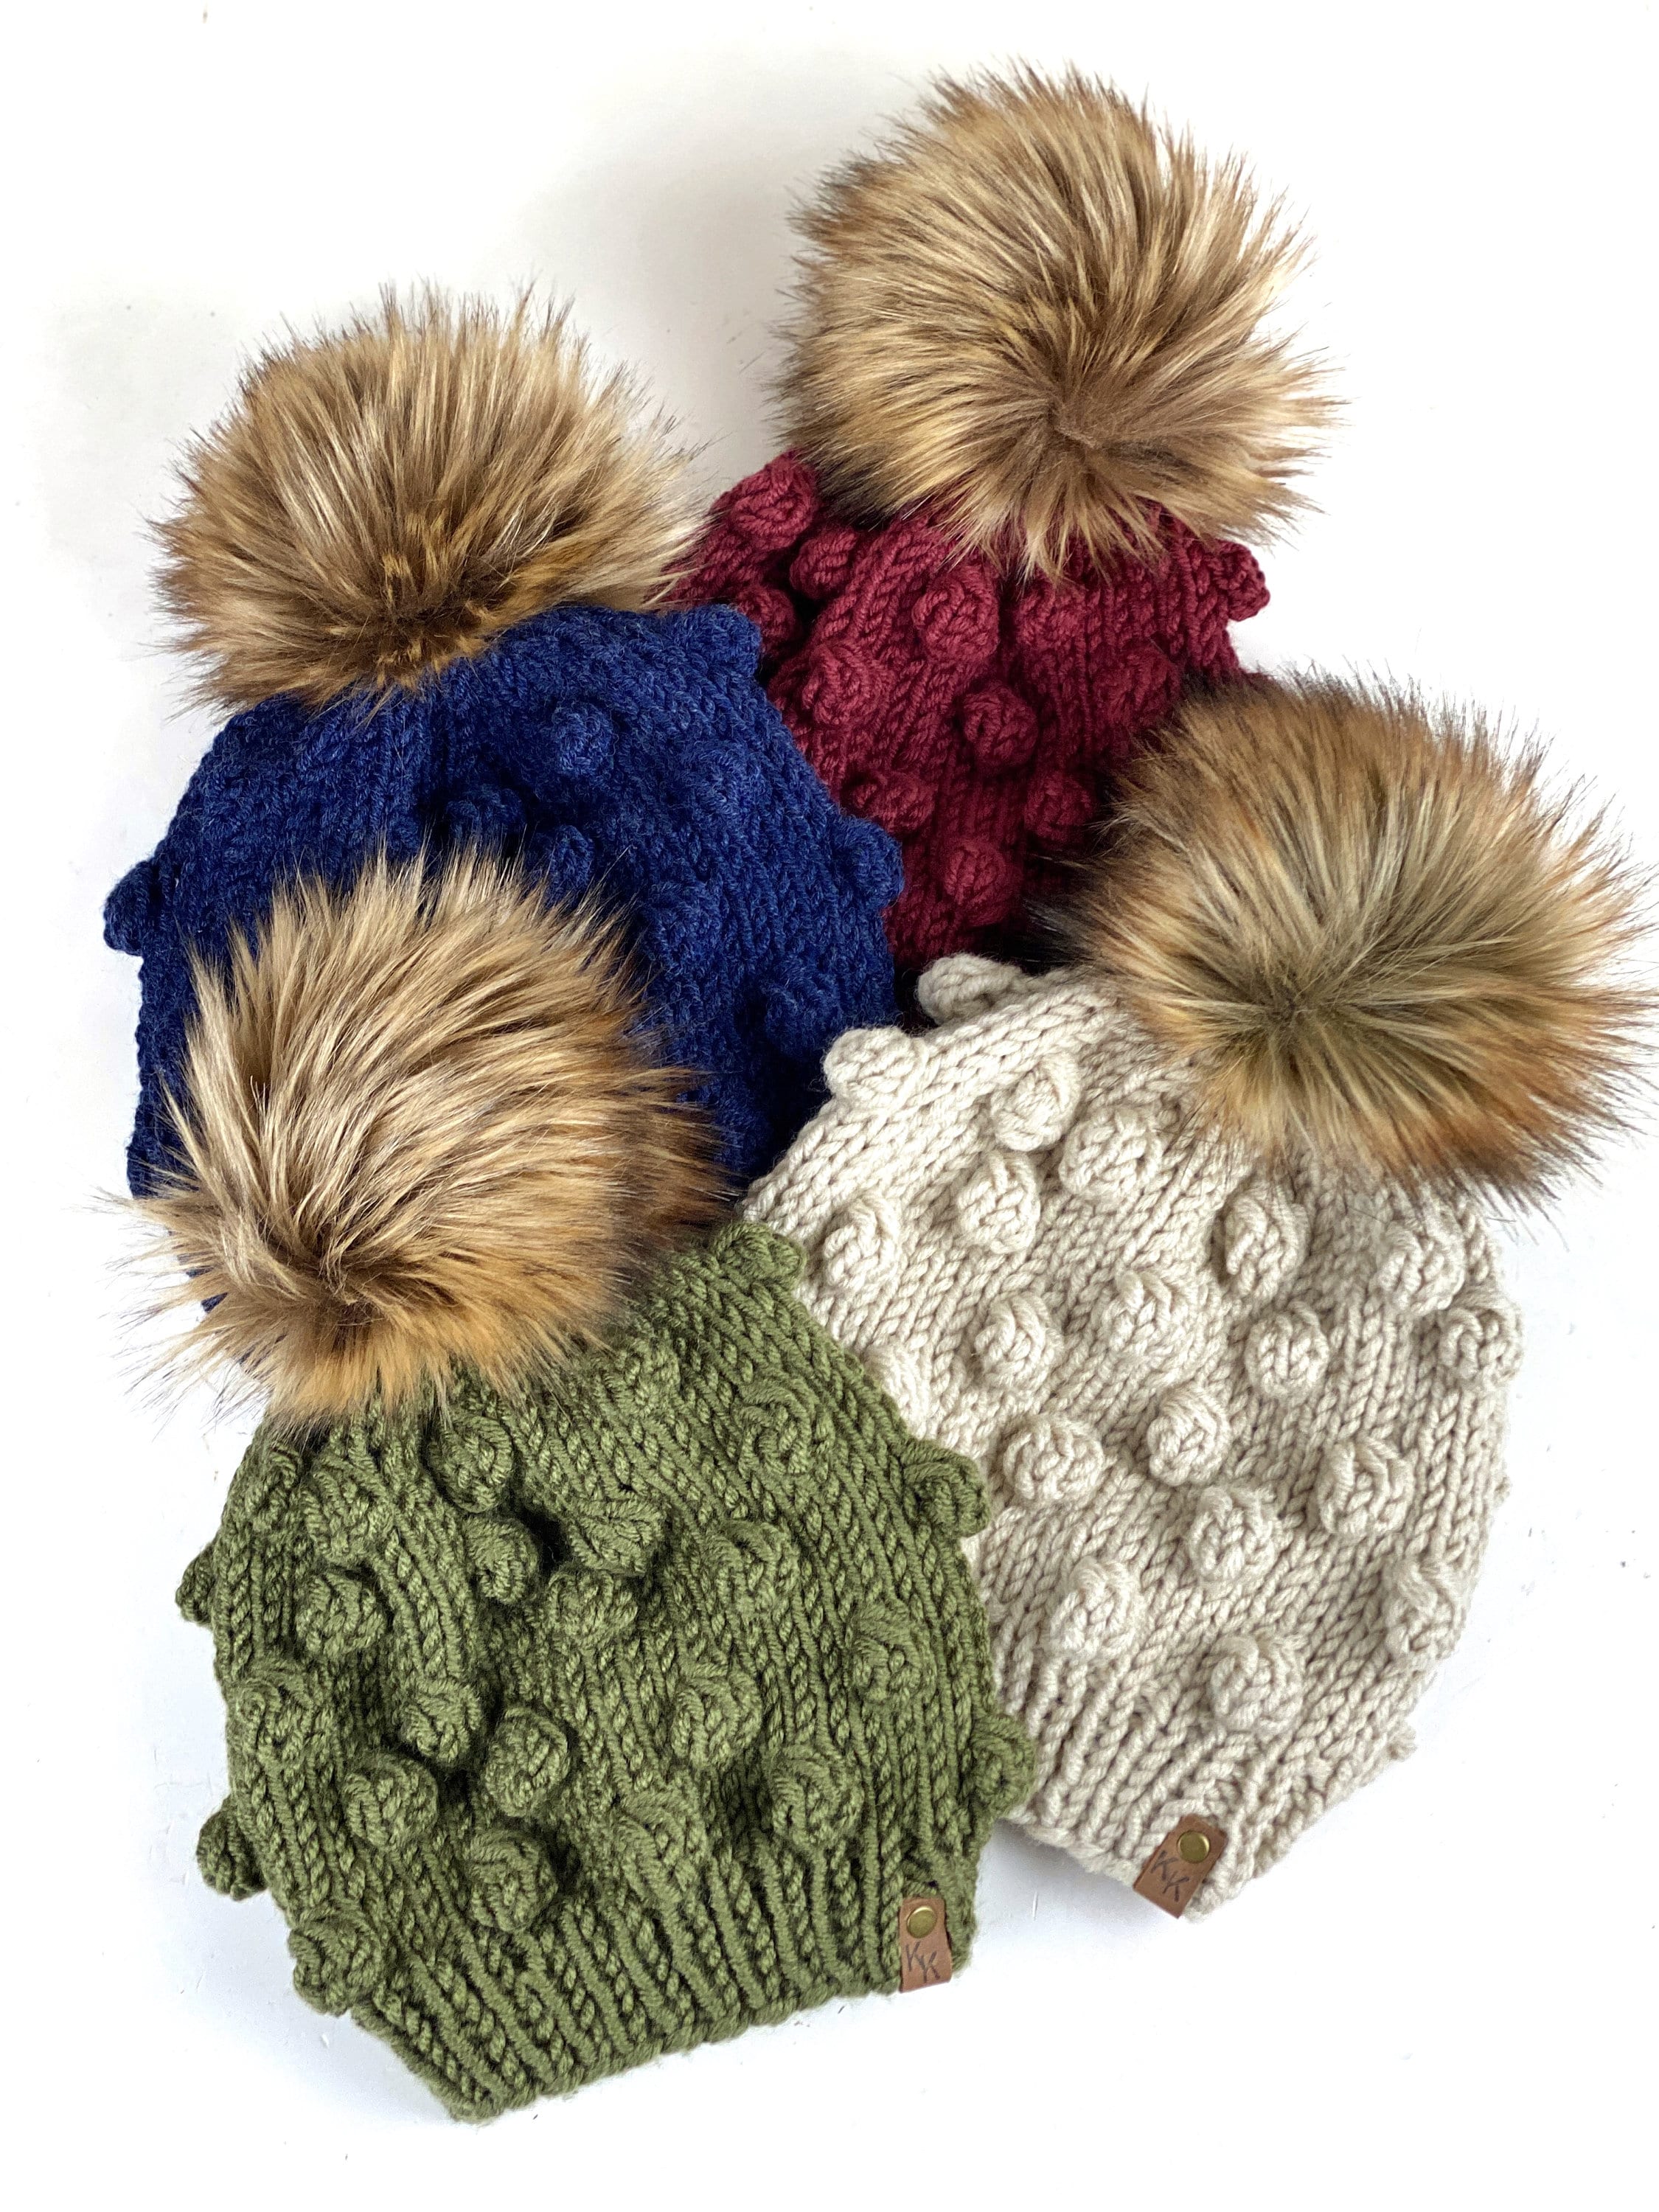 Natural Look Faux Fur Raccoon Pom Poms for Crochet Crafts Large Fluffy  Pompom for Knitted Hats and Beanies 4 Inch Detachable Poms With Snap 